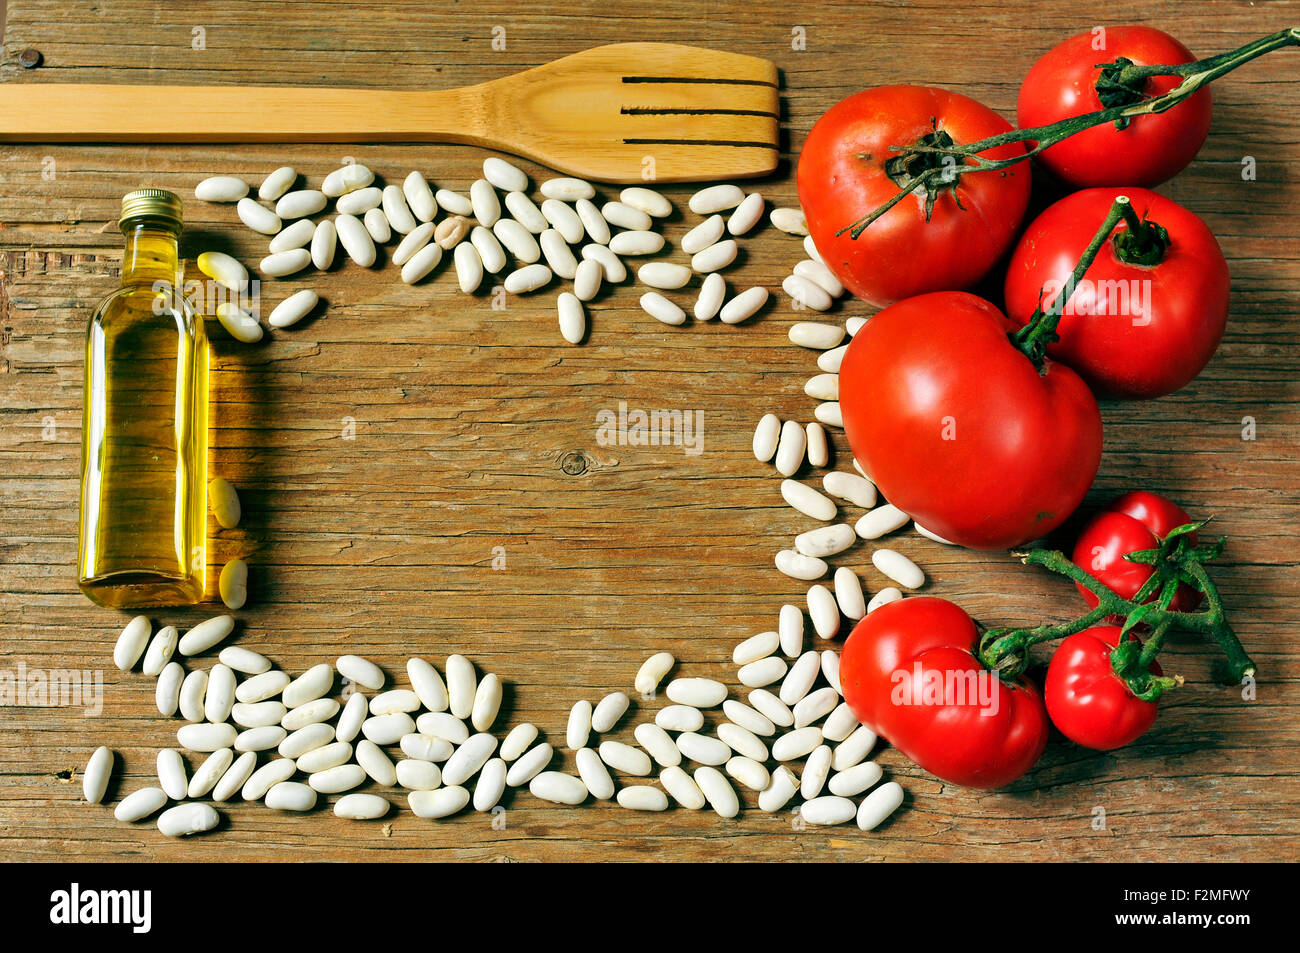 high-angle shot of a wooden fork, a bottle of olive oil, some white beans and some tomatoes on a rustic wooden table arranged to Stock Photo